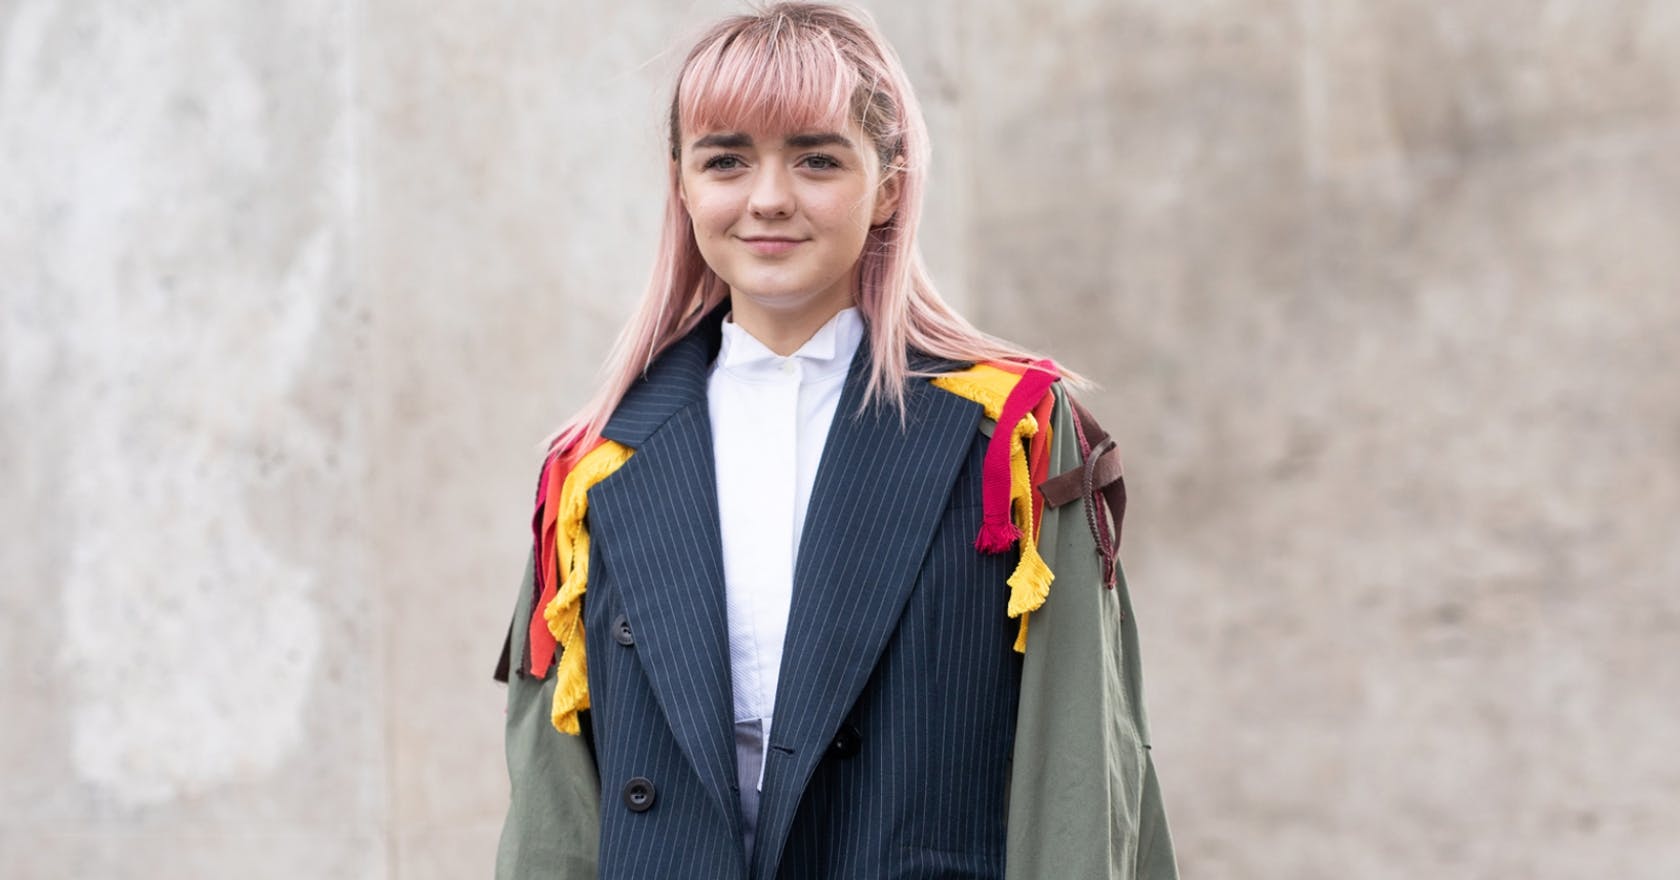 Maisie Williams Dyed Her Hair Pink Because She Wanted A Break From Work